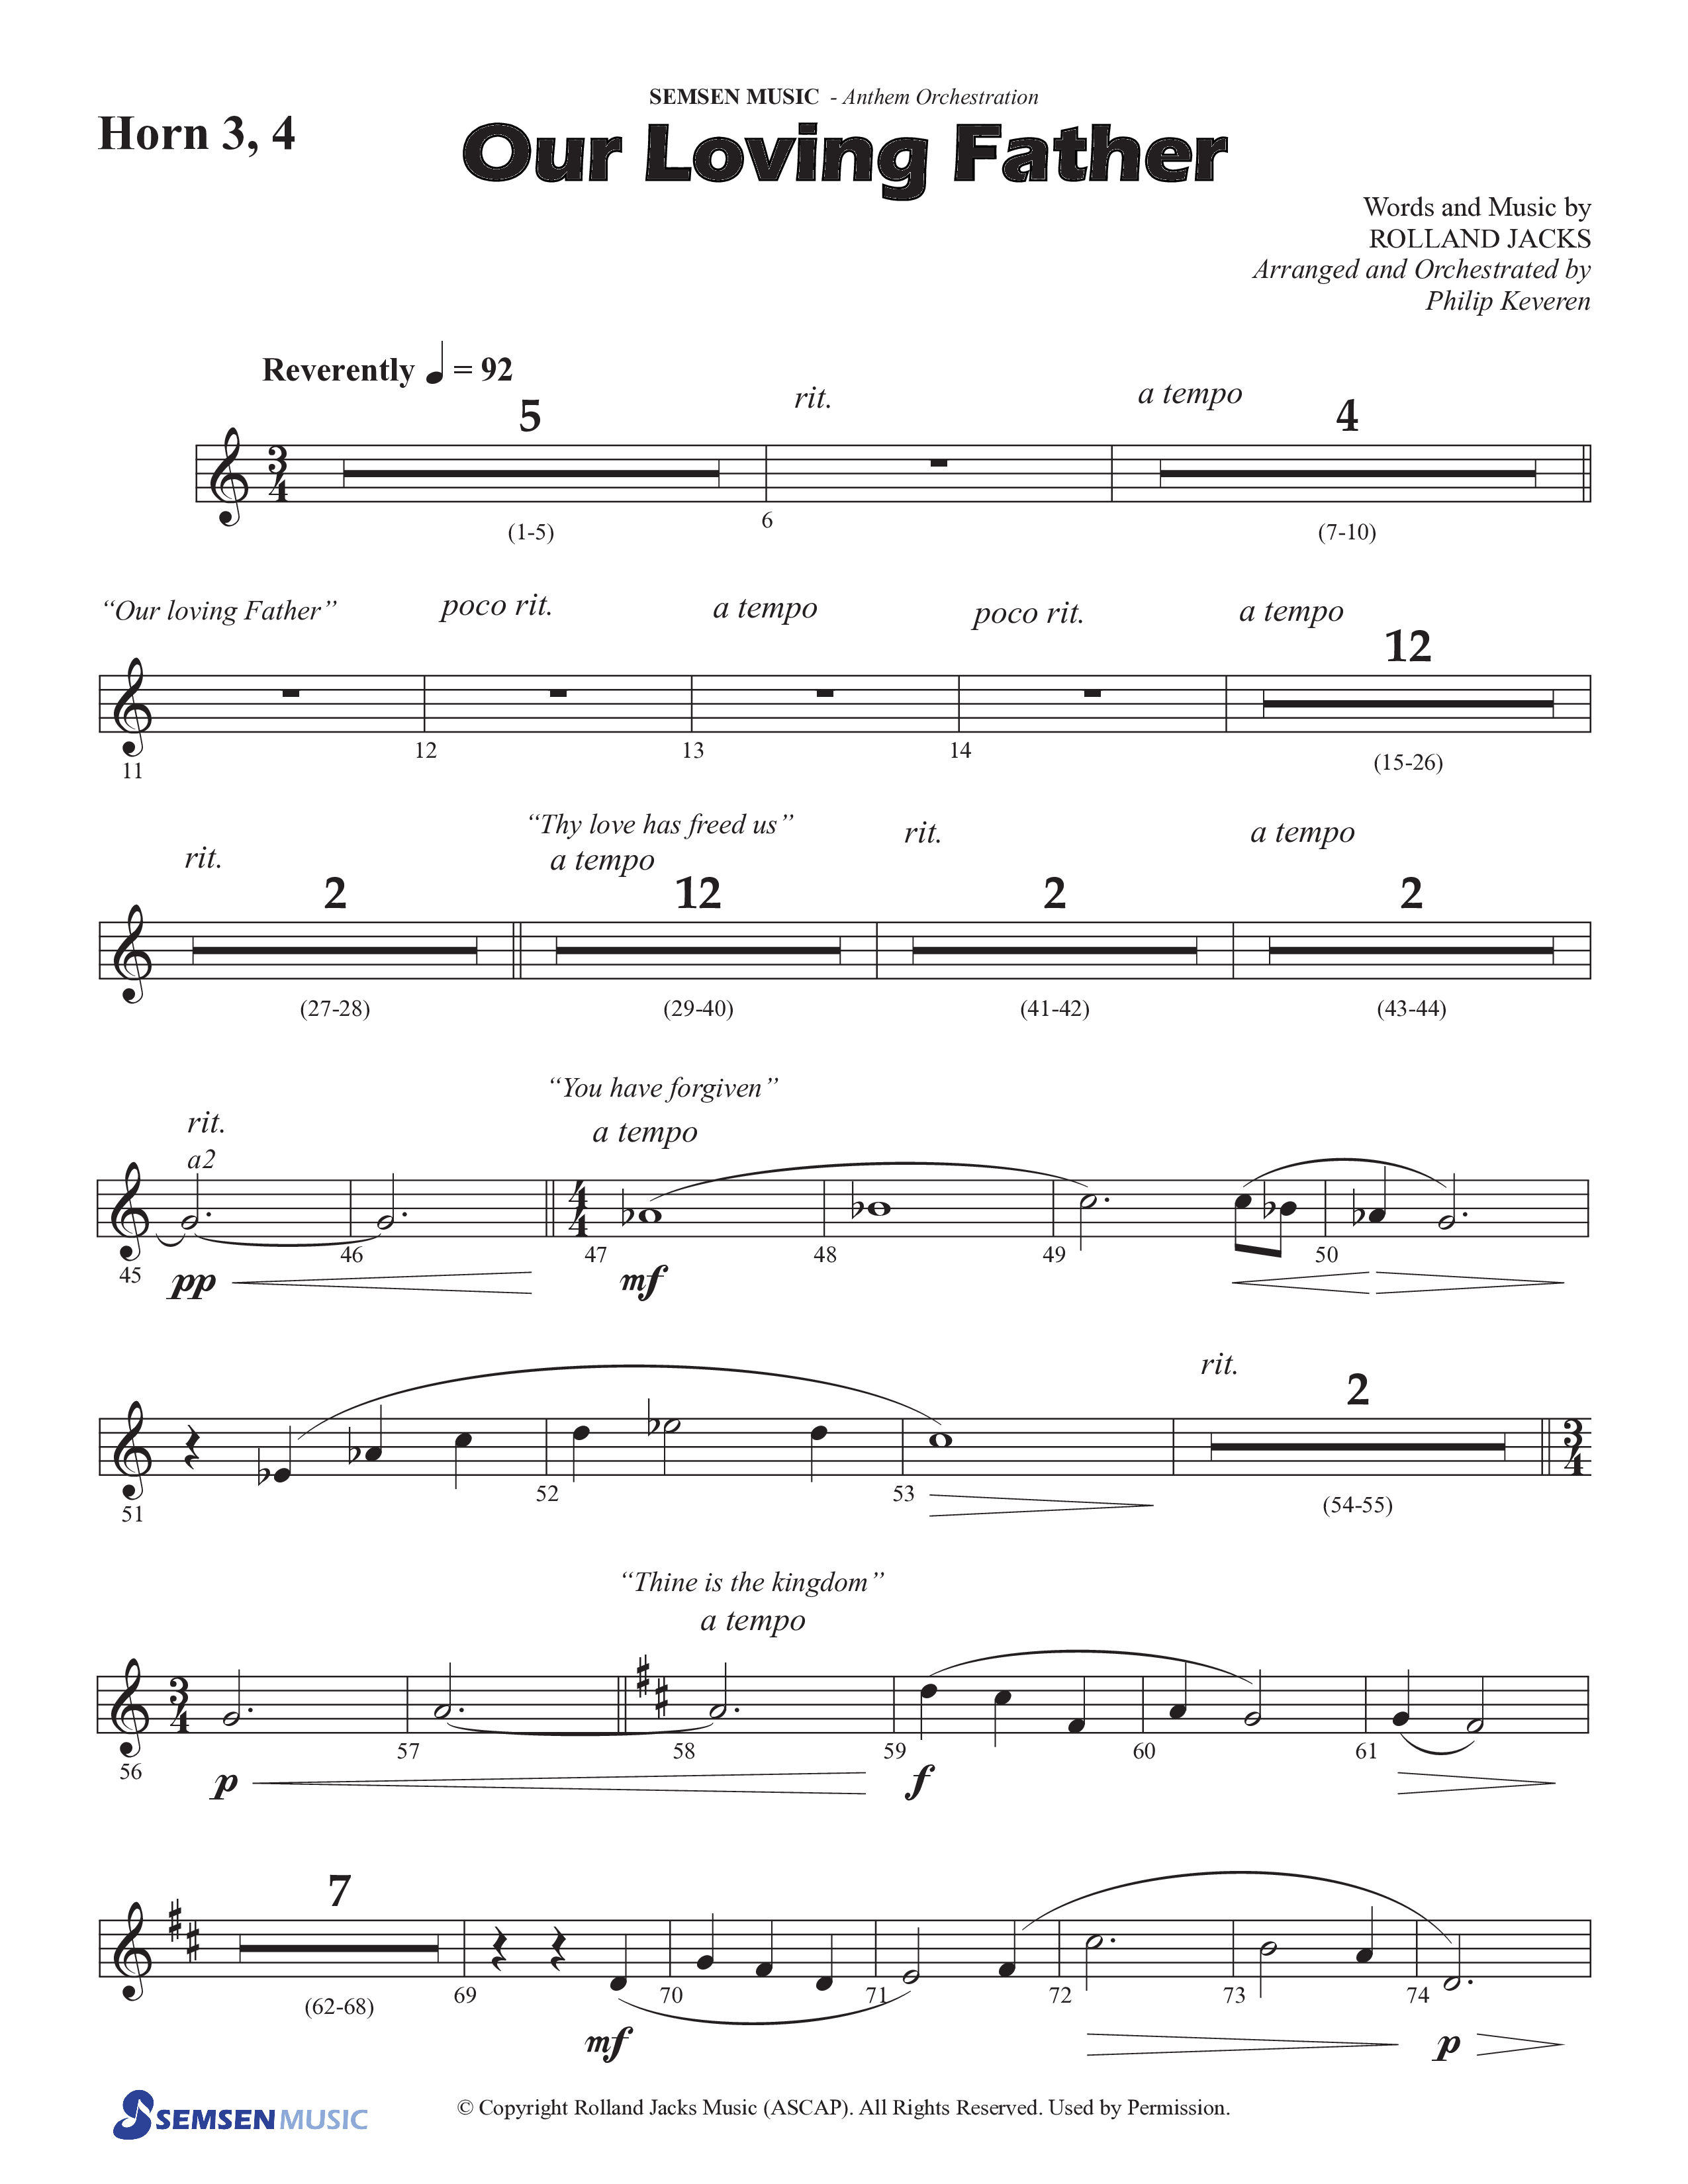 Our Loving Father (Choral Anthem SATB) French Horn 3 (Semsen Music / Arr. Phillip Keveren)